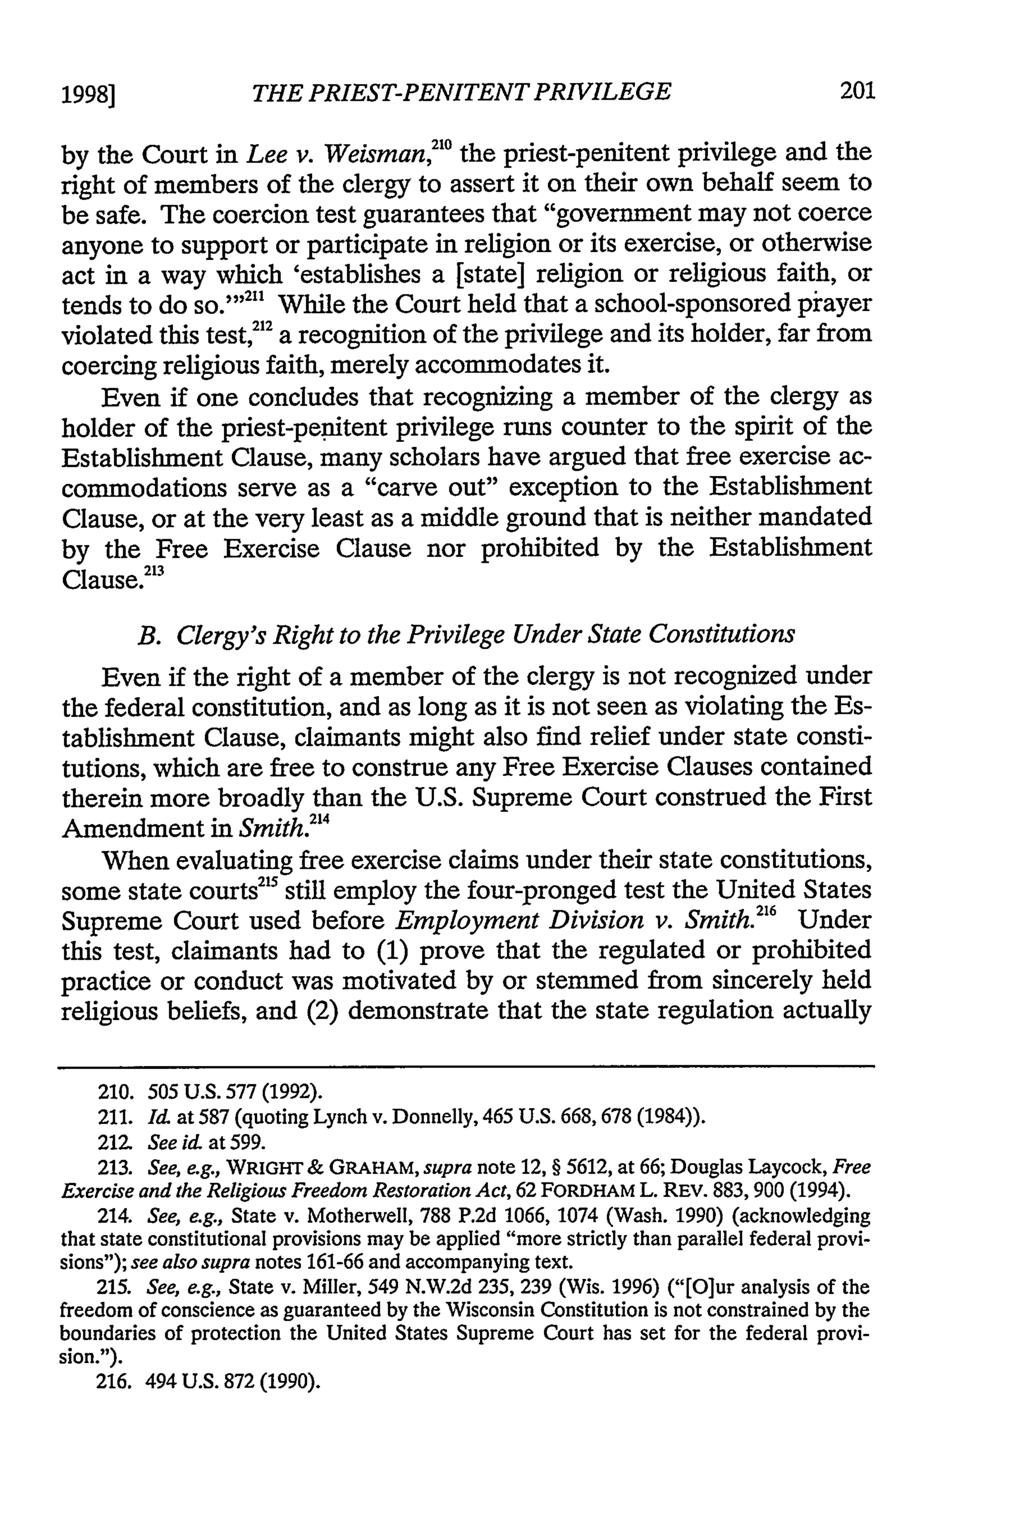 1998] THE PRIEST-PENITENT PRIVILEGE by the Court in Lee v. Weisman, 210 the priest-penitent privilege and the right of members of the clergy to assert it on their own behalf seem to be safe.